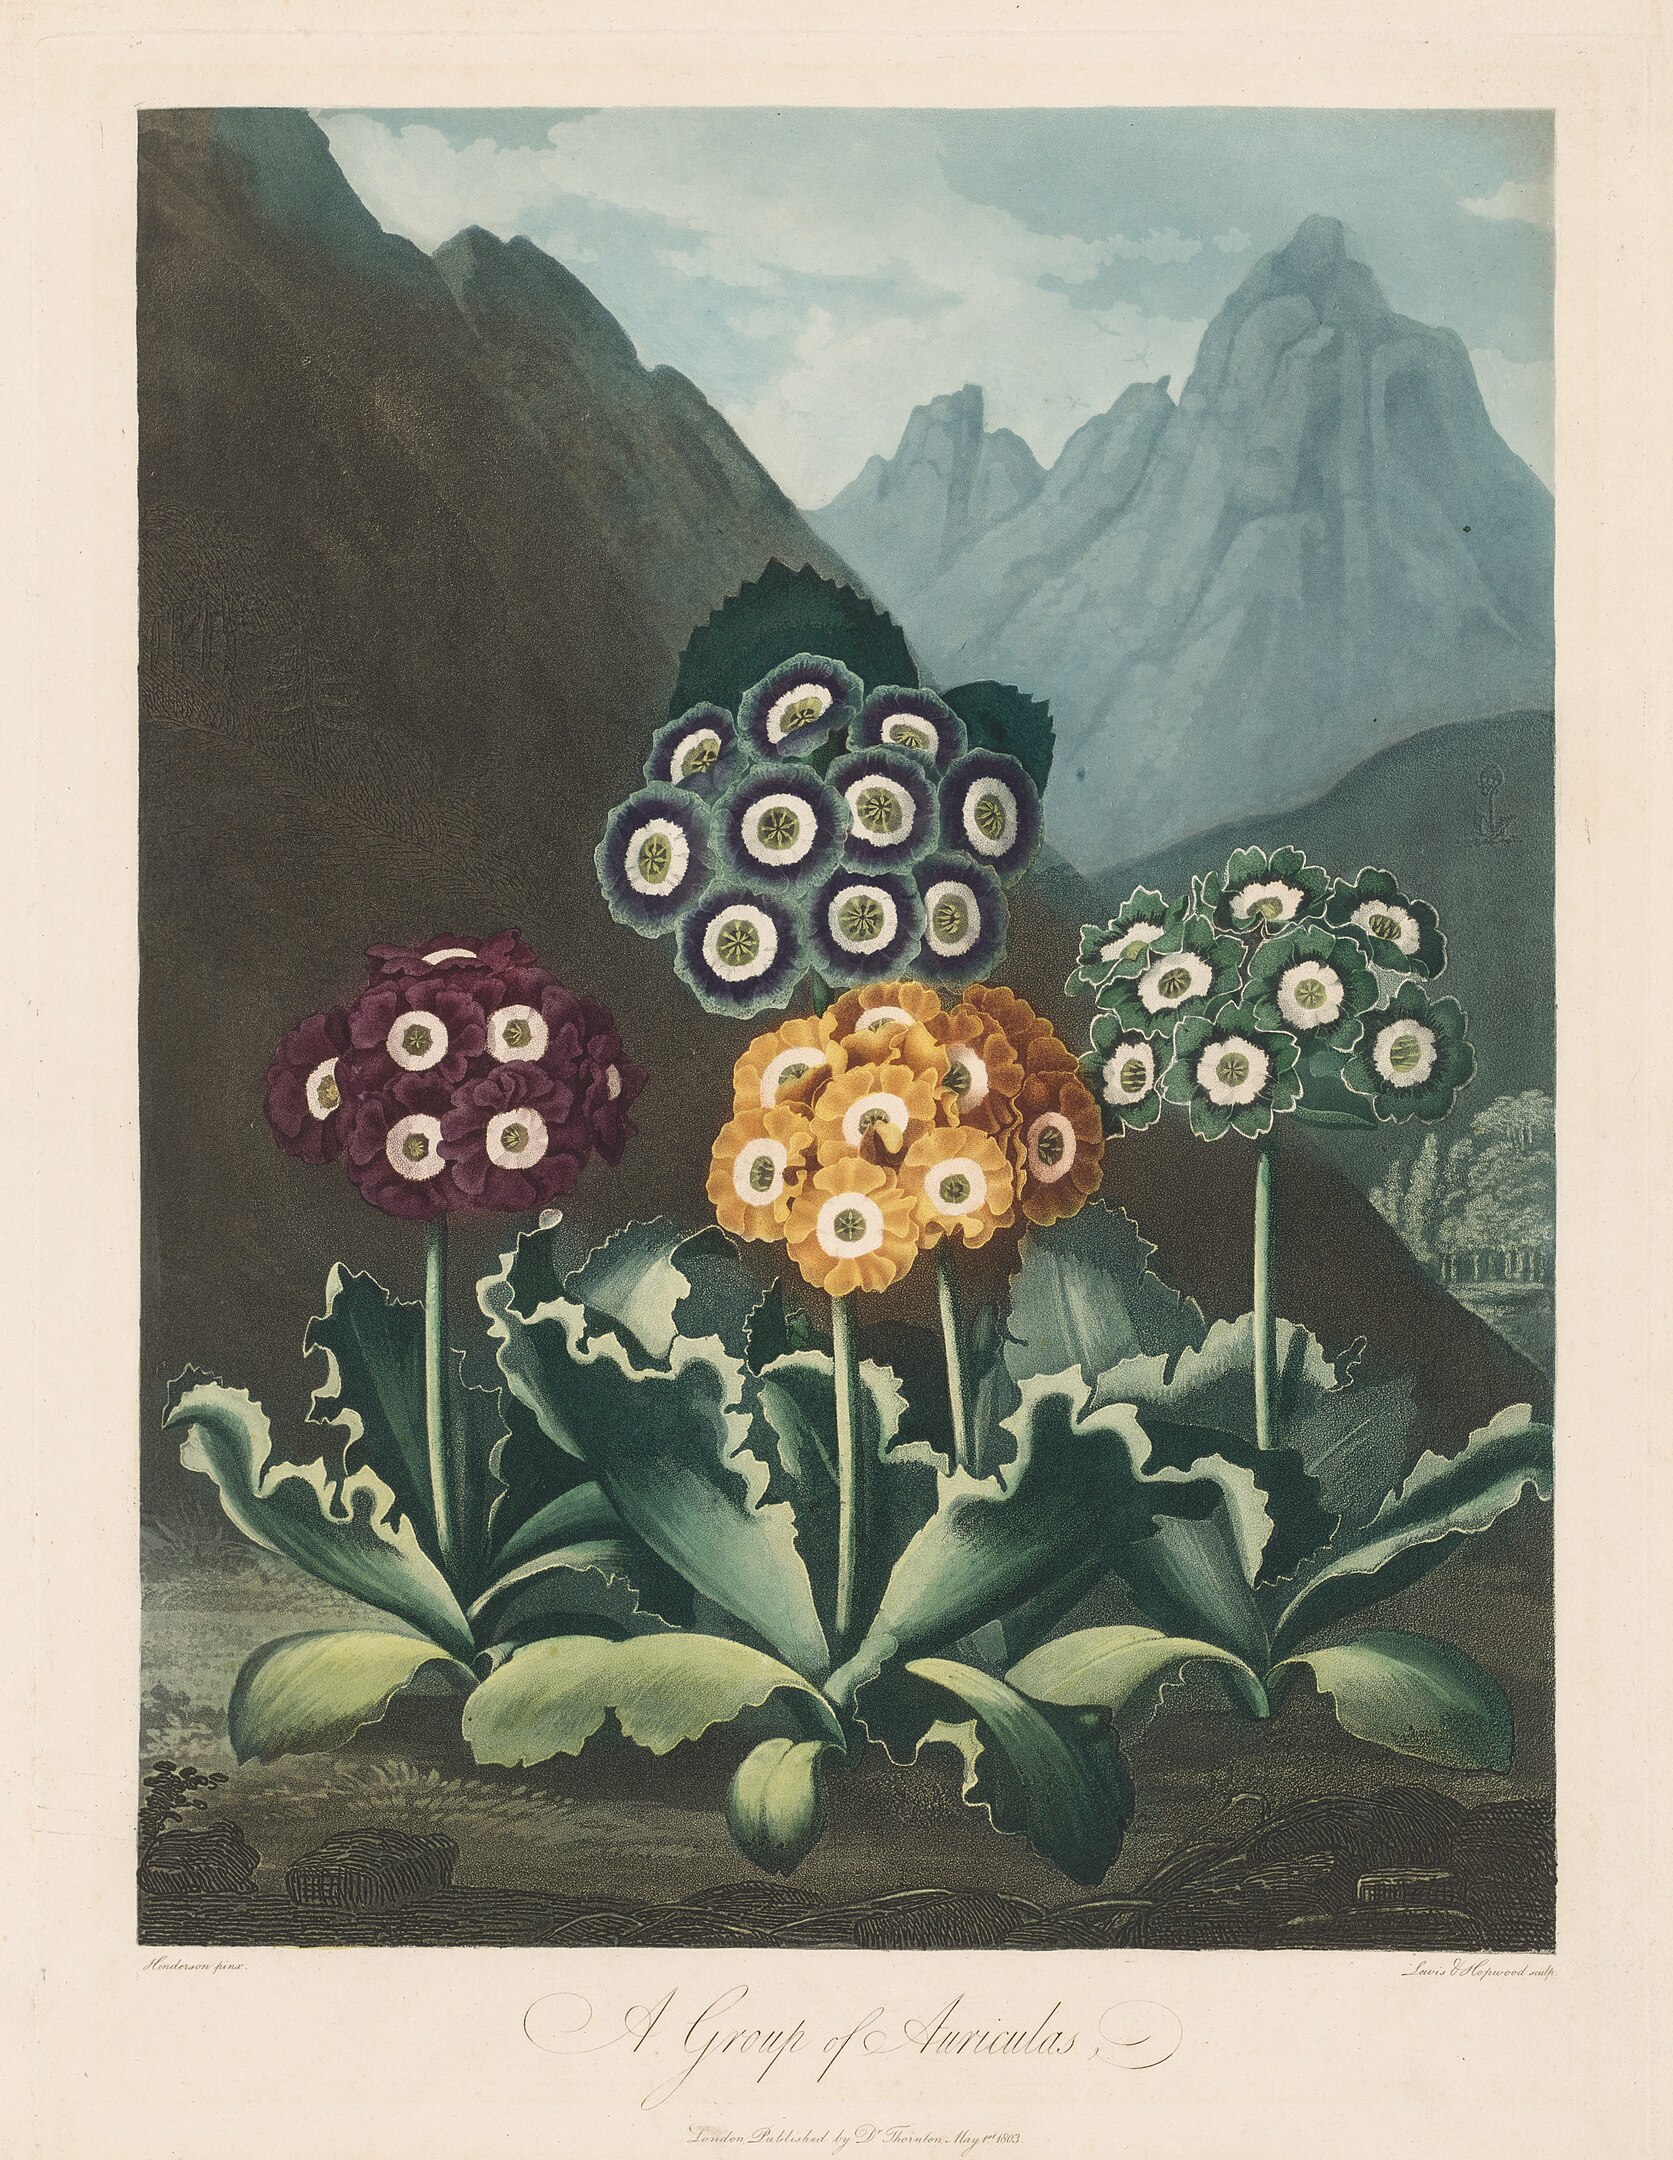 An illustration of exotic flowers in a mountainous landscape